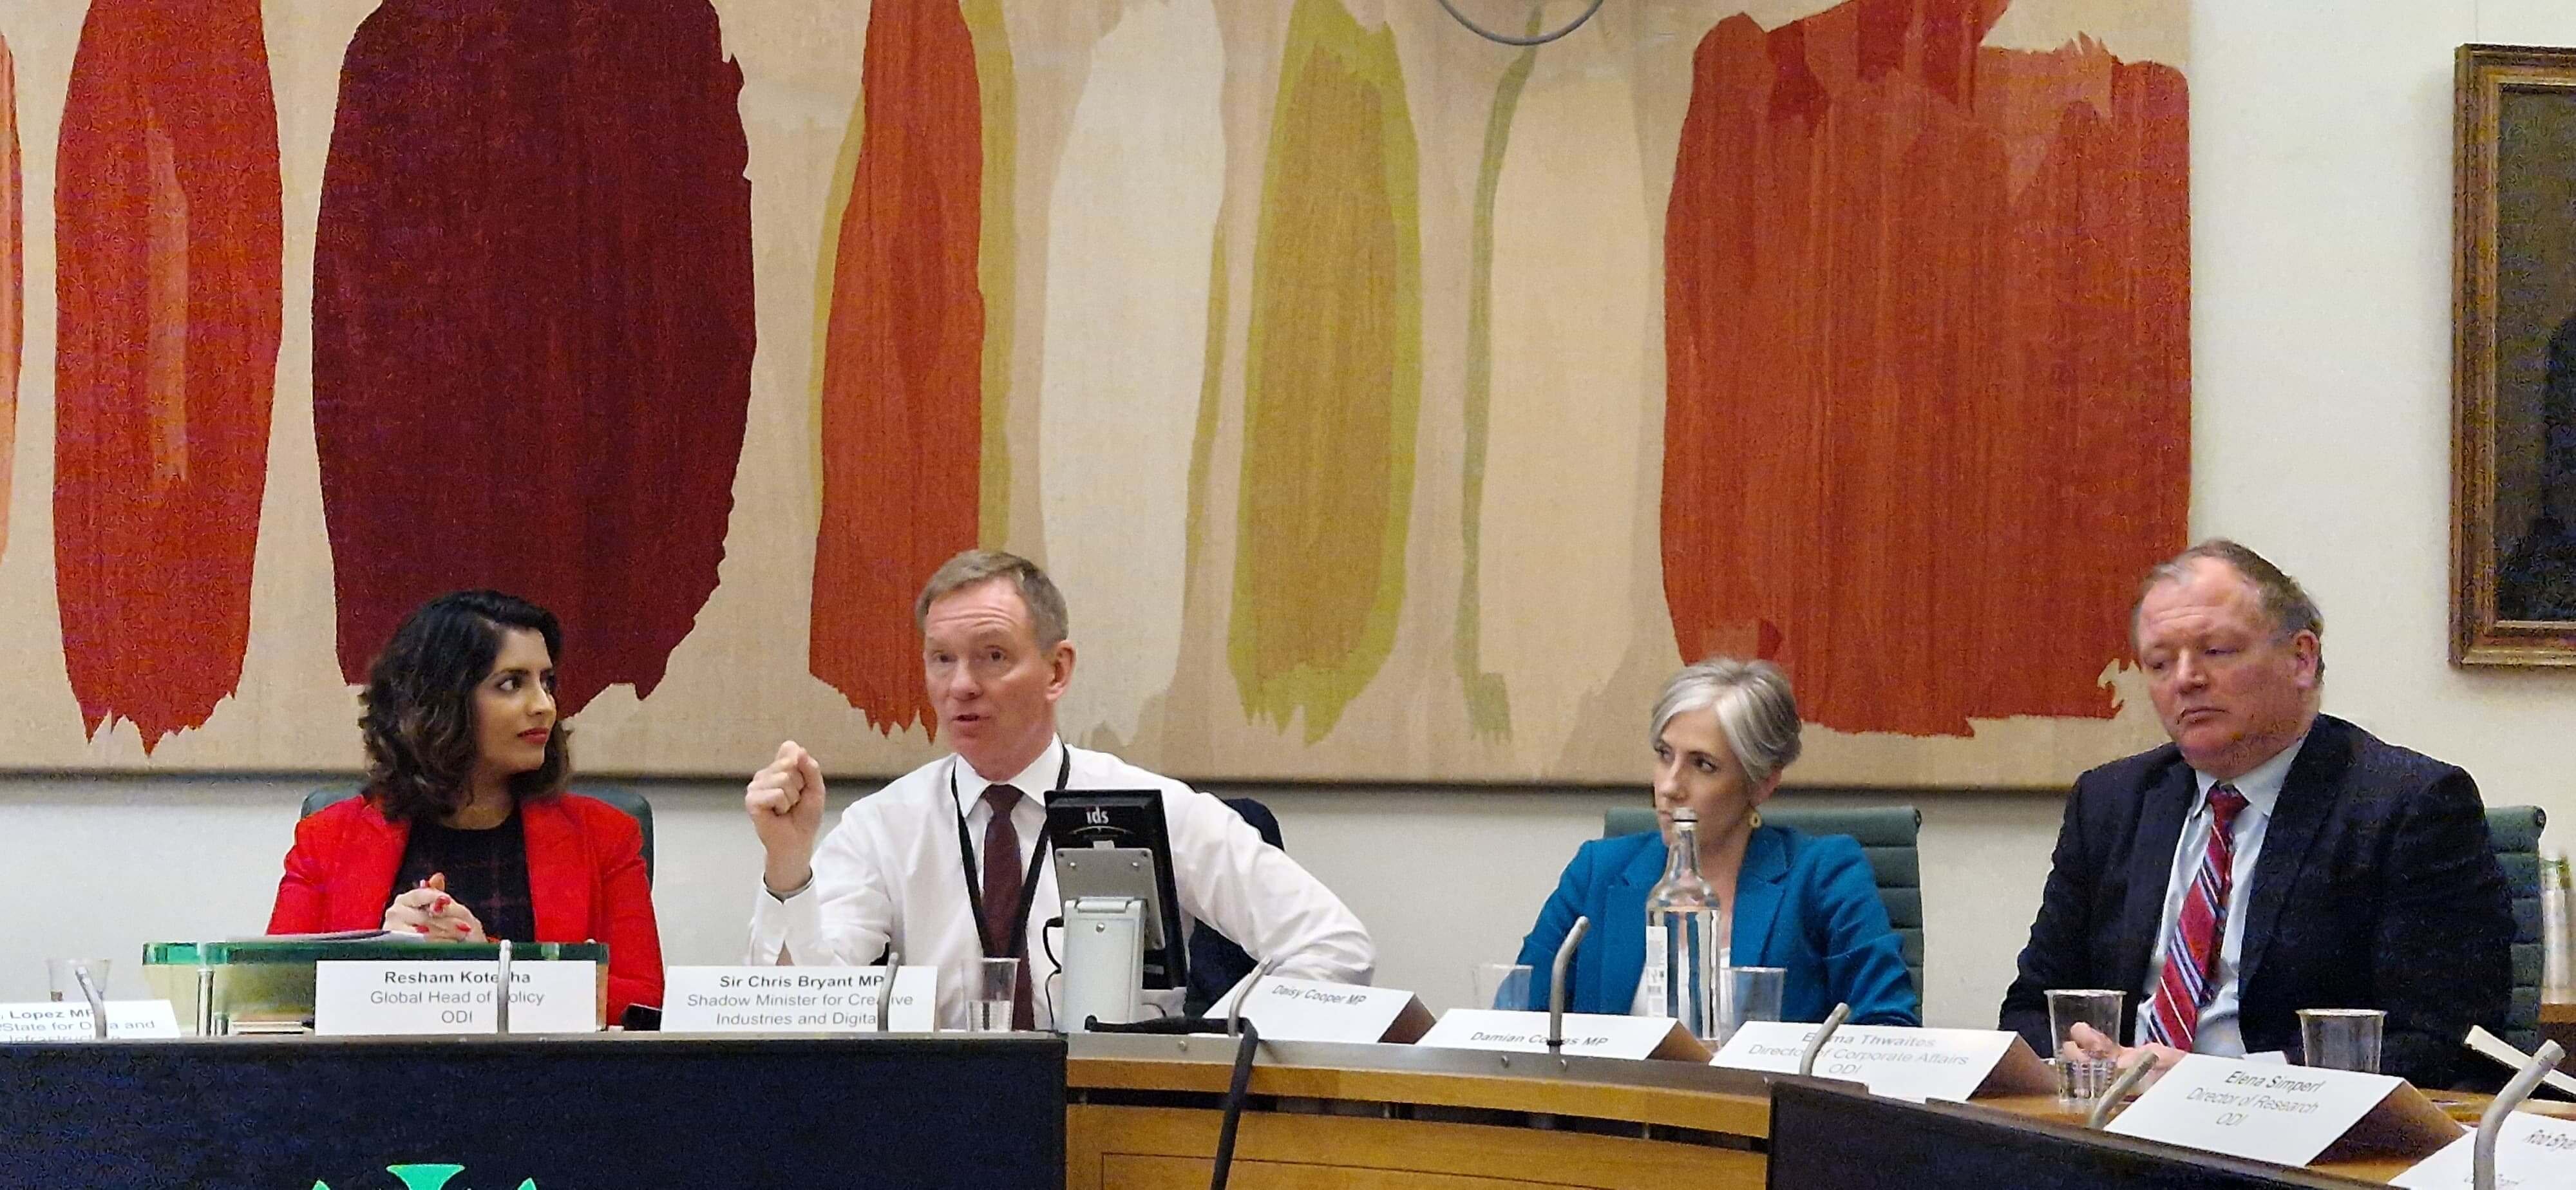 Chris Bryant MP speaks at the ODI's manifesto launch in Westminster